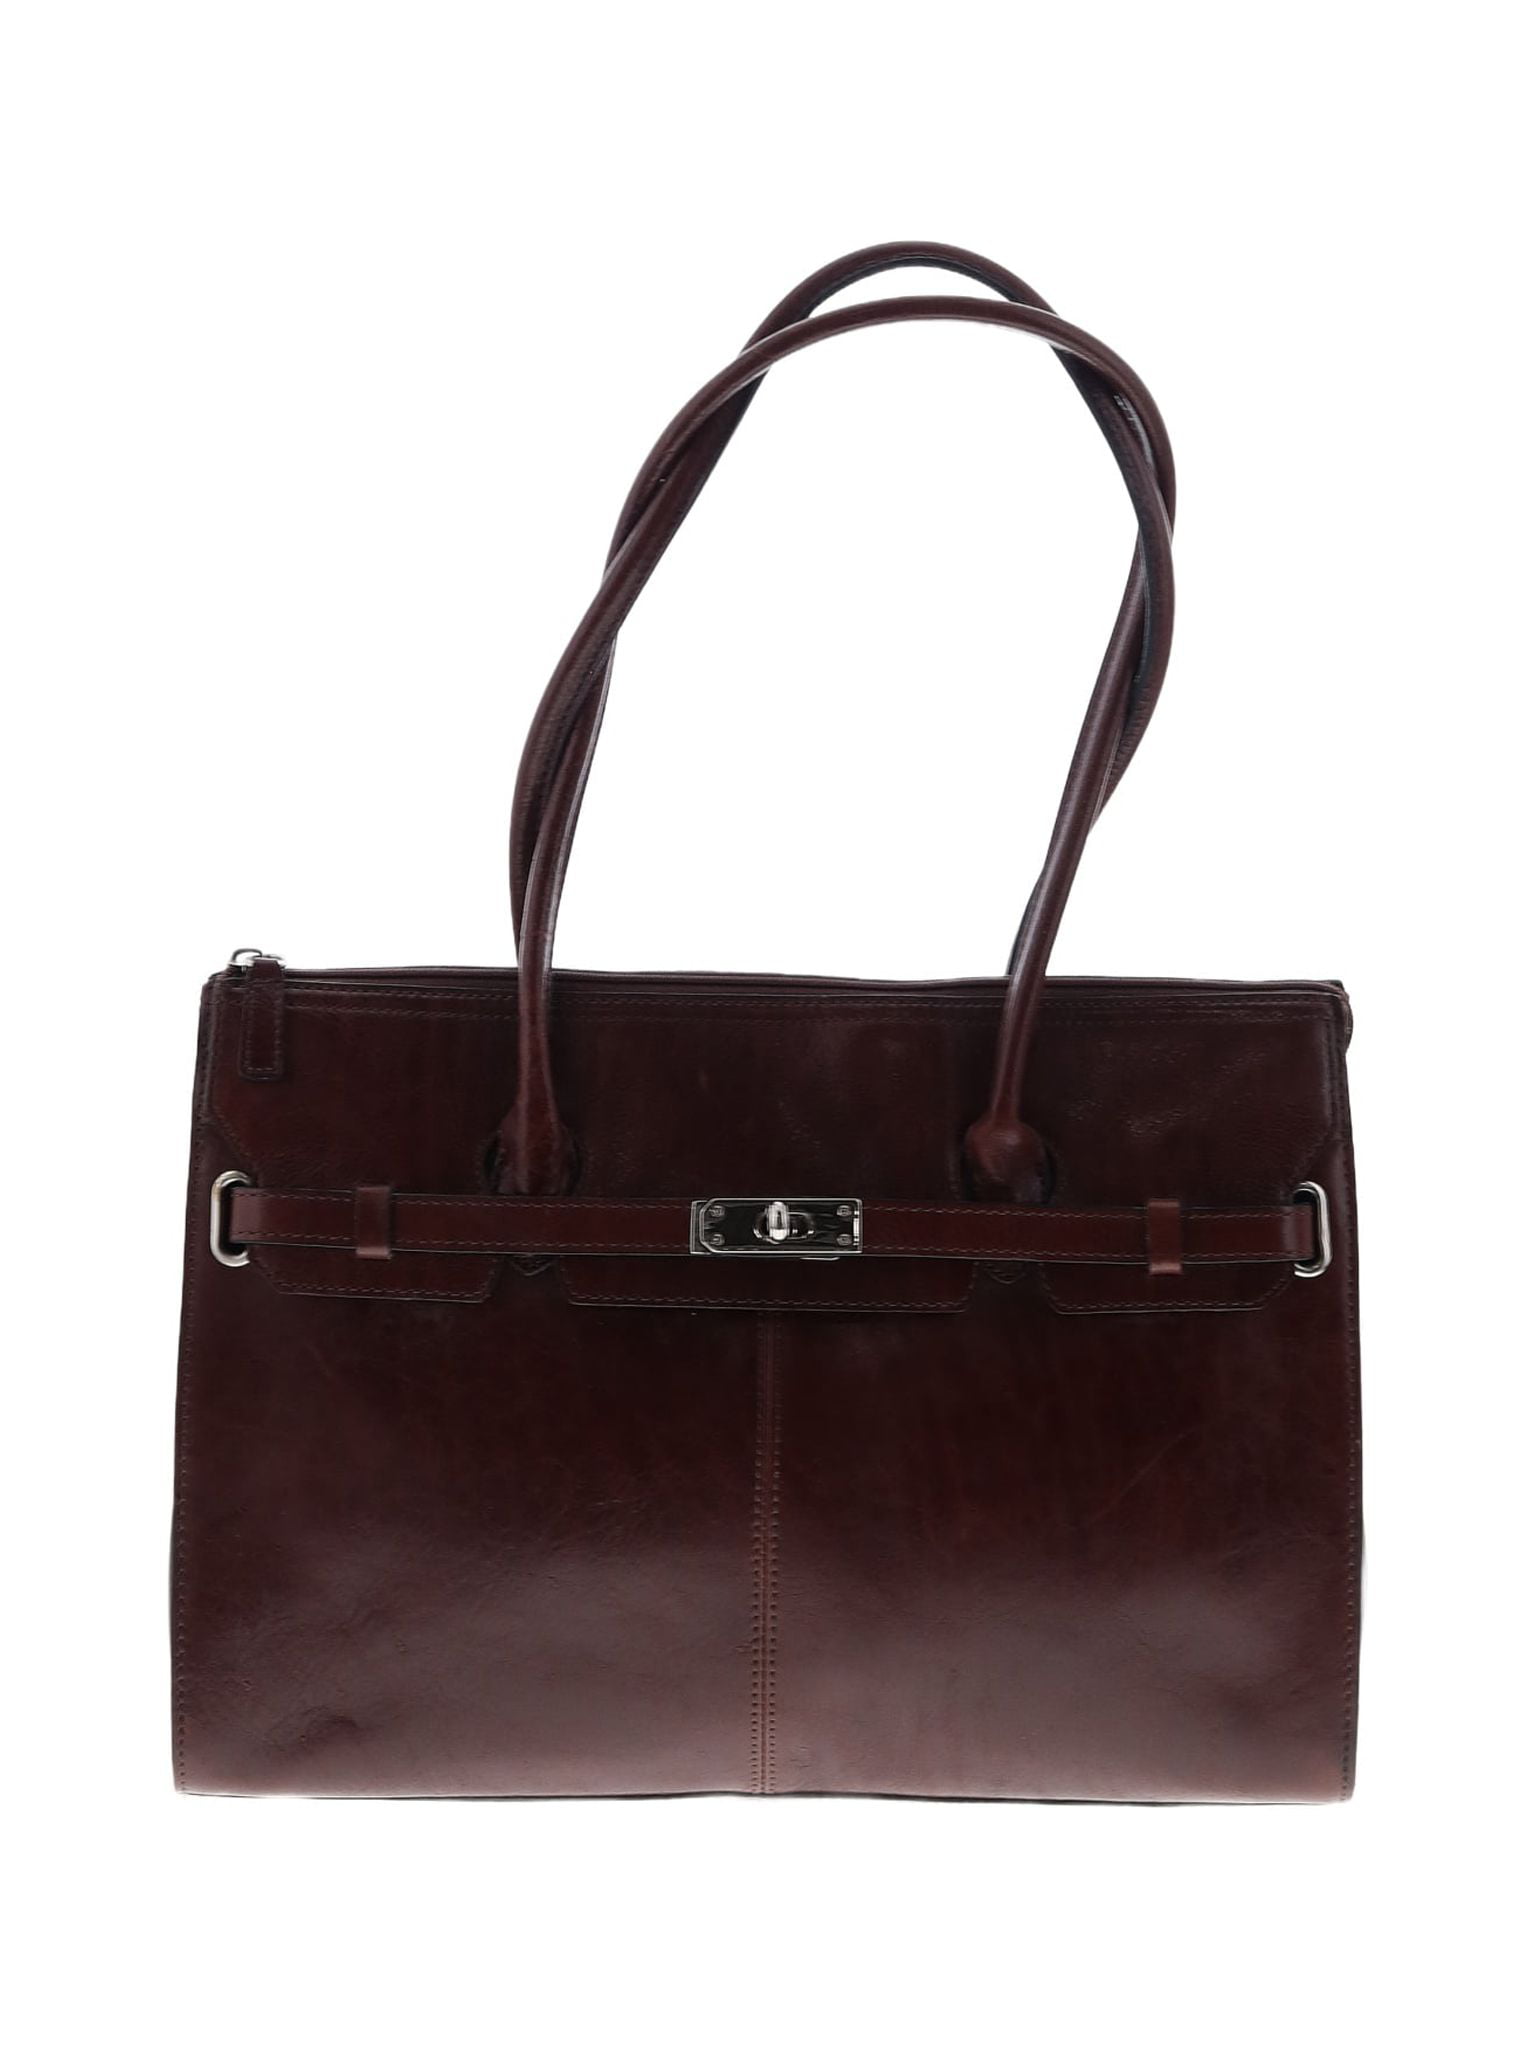 Buy Wilsons Leather Bag Online In India  Etsy India